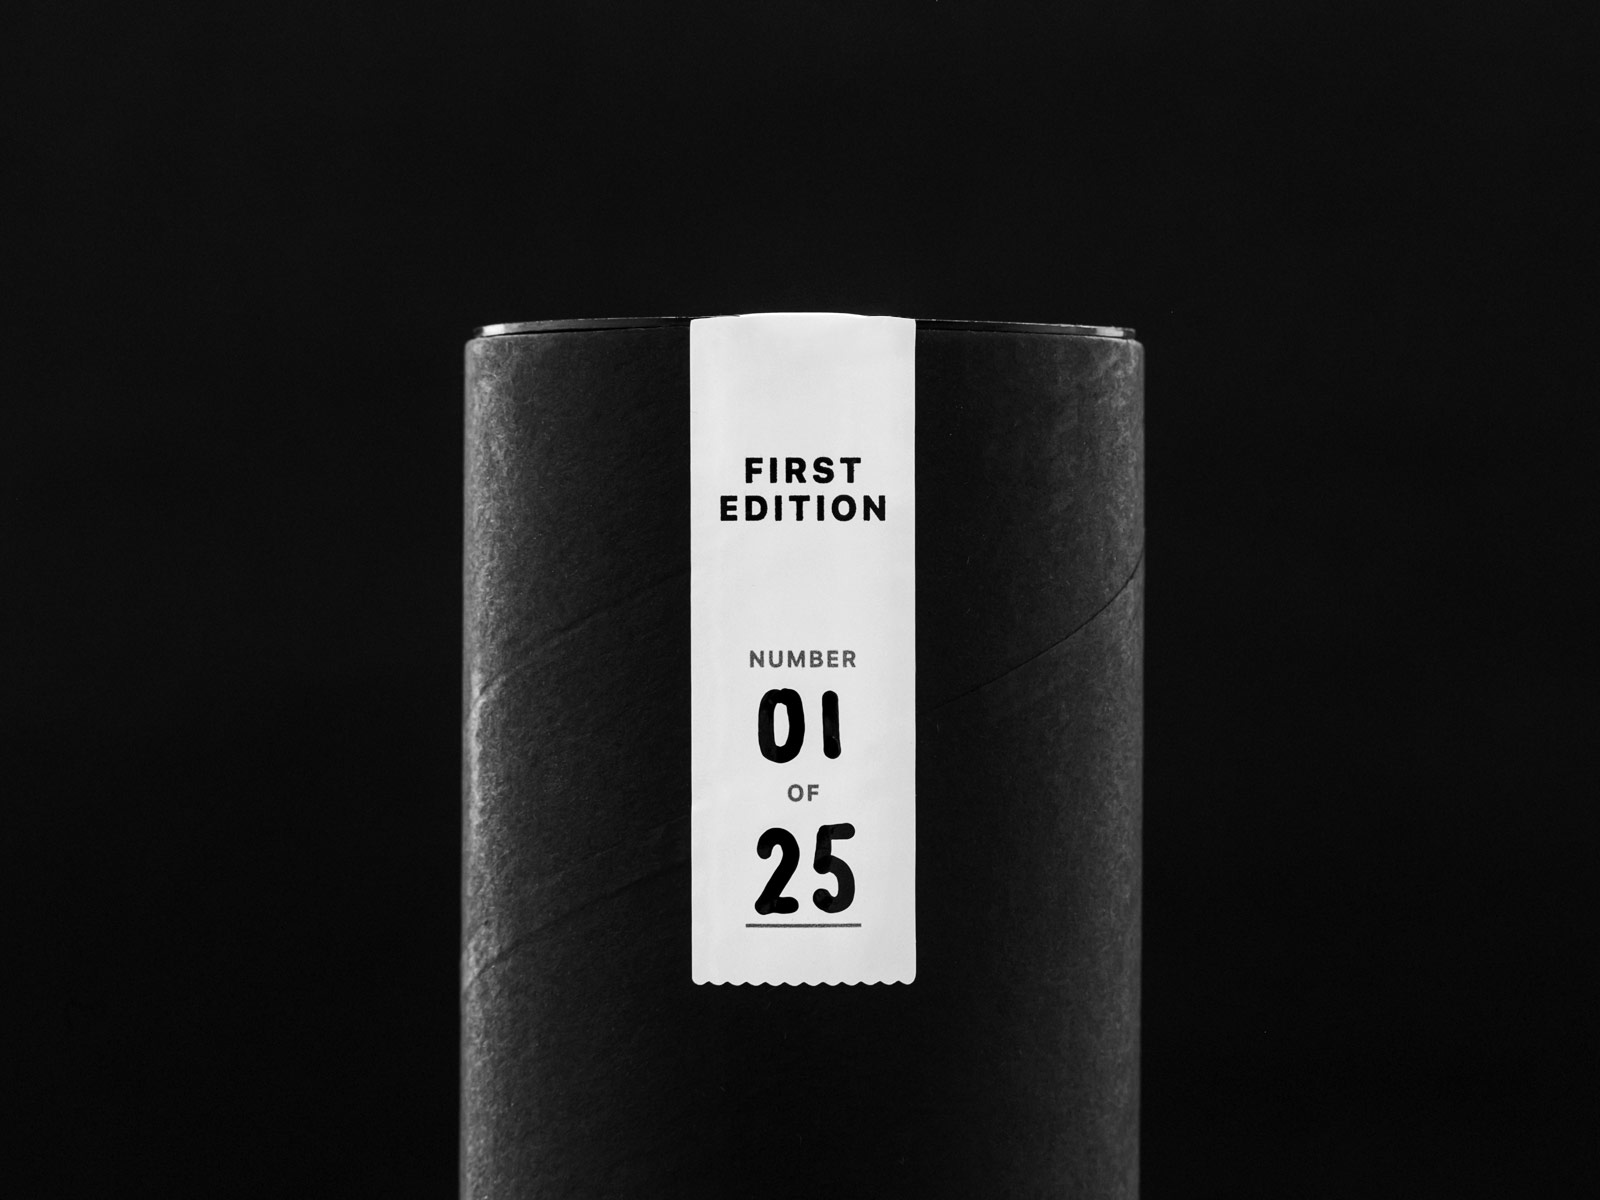 Close-up photo of the first edition seal on the black packaging tube